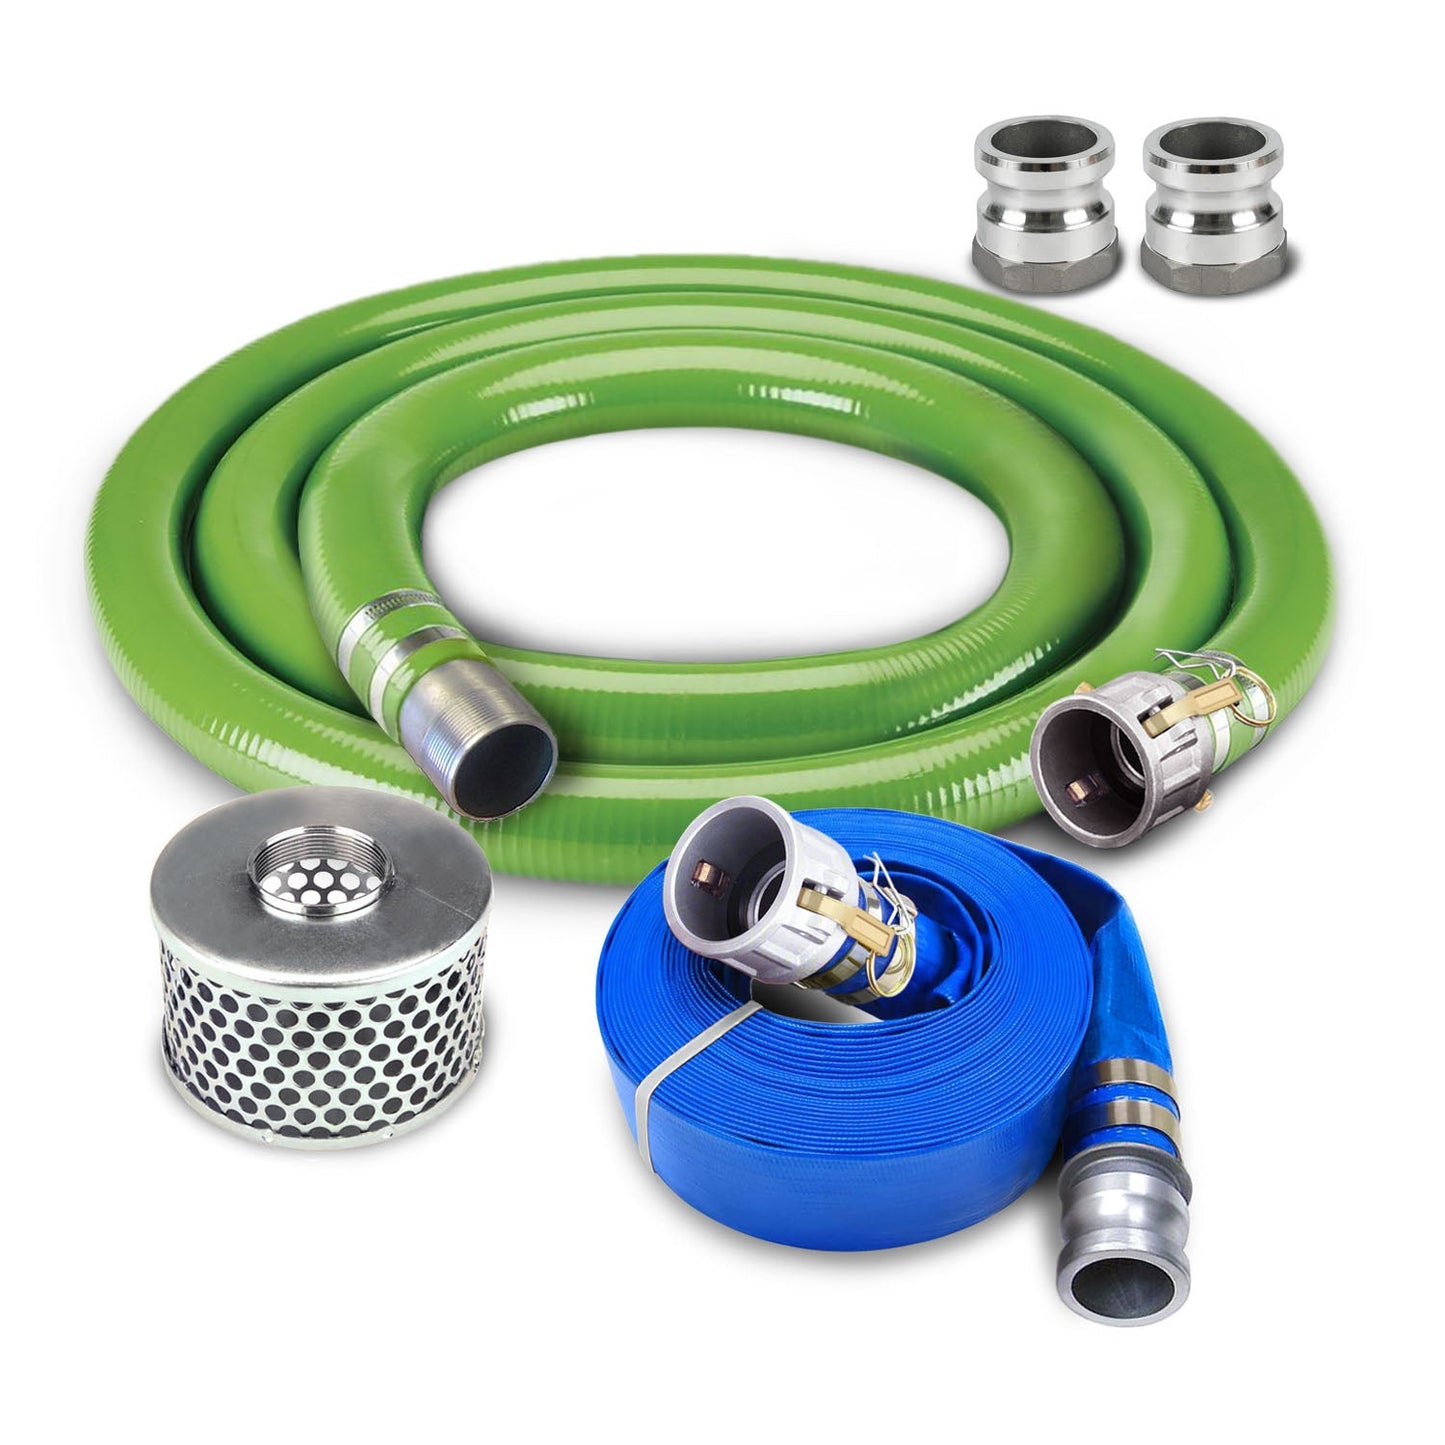 Foresee PVC 20 FT Suction Hose, 50 FT Discharge Hose, and Strainer Kit with Camlock Type C and MNPT Couplings